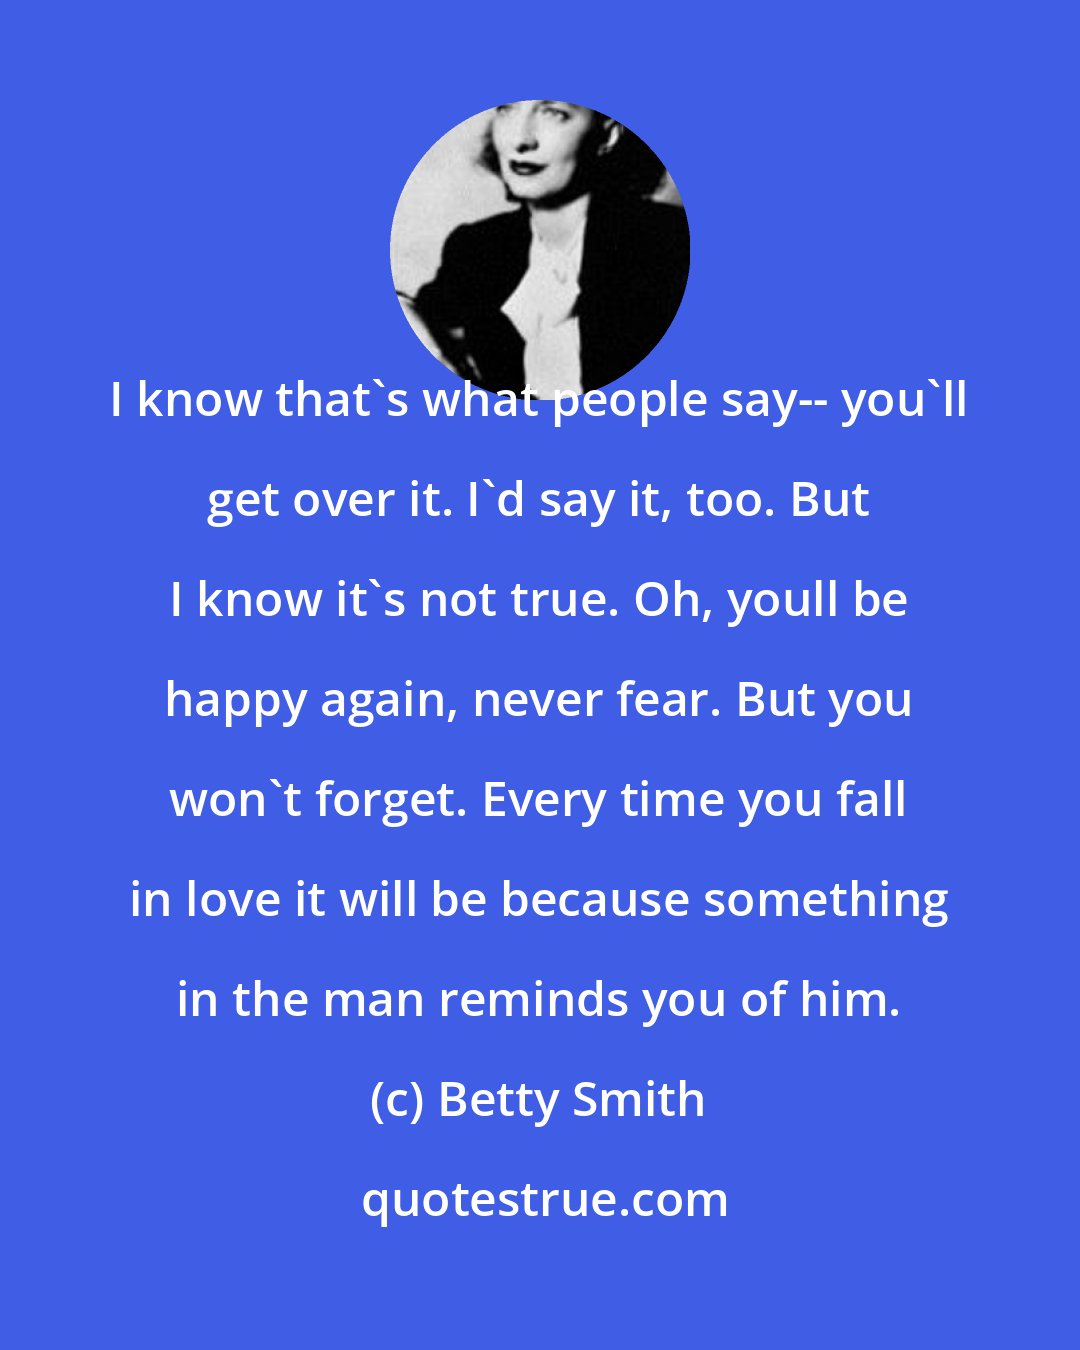 Betty Smith: I know that's what people say-- you'll get over it. I'd say it, too. But I know it's not true. Oh, youll be happy again, never fear. But you won't forget. Every time you fall in love it will be because something in the man reminds you of him.